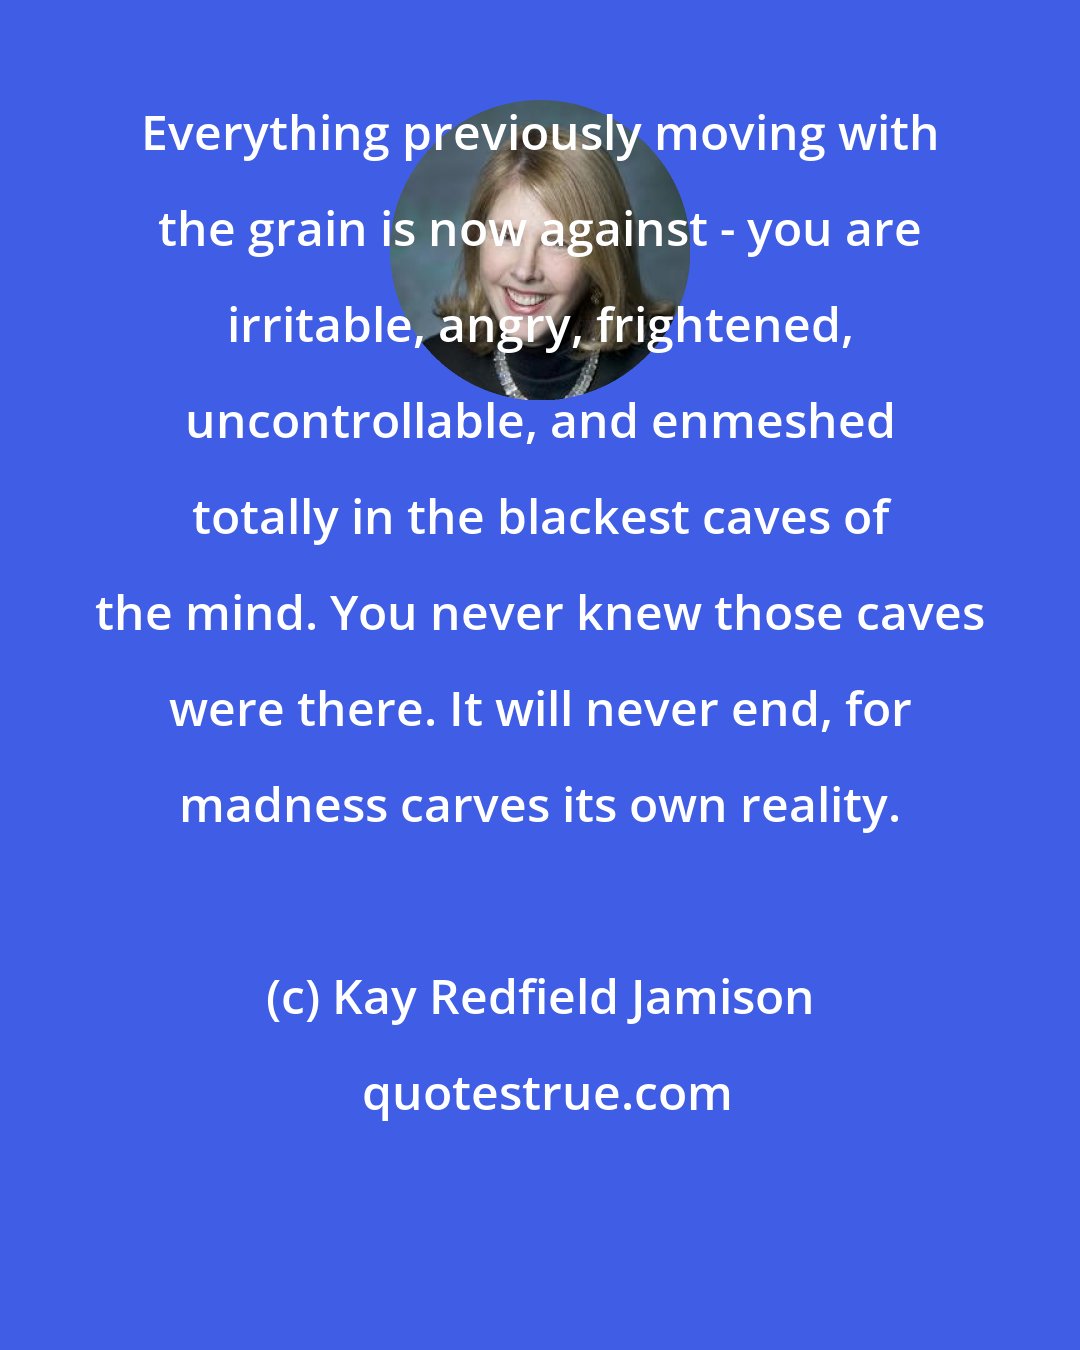 Kay Redfield Jamison: Everything previously moving with the grain is now against - you are irritable, angry, frightened, uncontrollable, and enmeshed totally in the blackest caves of the mind. You never knew those caves were there. It will never end, for madness carves its own reality.